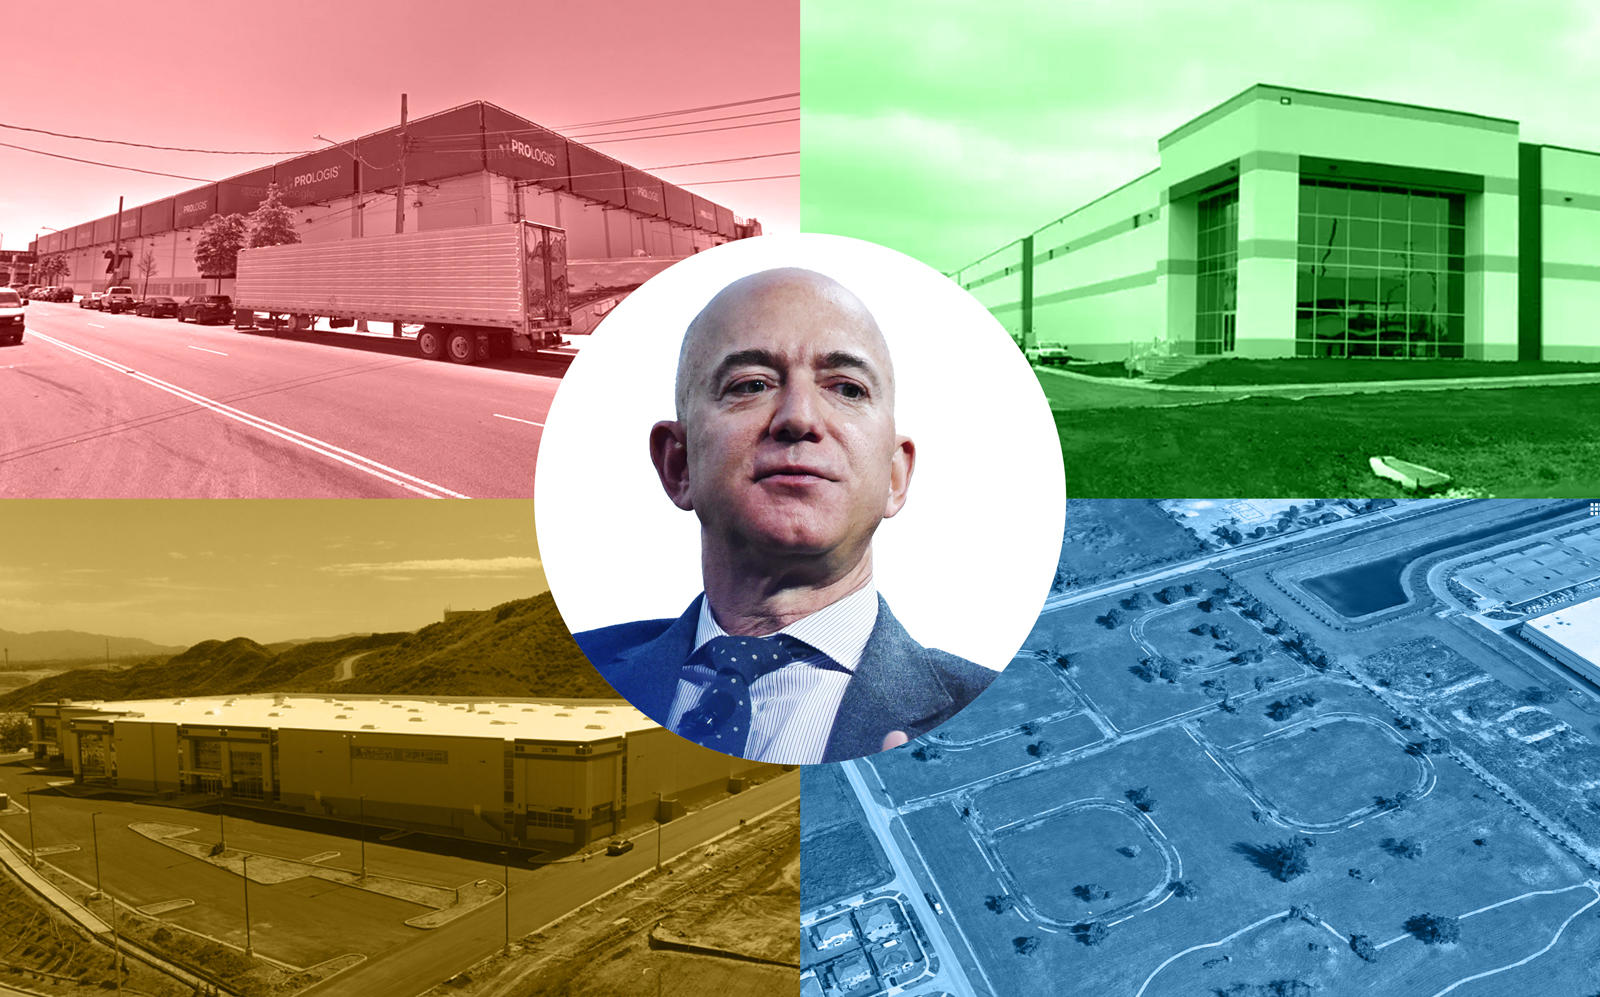 Amazon CEO Jeff Bezos with (clockwise from top left: 1055 Bronx River Ave. in Bronx, NY; 3507 W. 51st St. in Chicago; 13200 Southwest 272nd St. in South Miami-Dade, Florida; 28820 Chase Place in Valencia, California (1055 Bronx River Ave via Google Maps; 3507 W. 51st St. via 42 Floors; 13200 Southwest 272nd St. via Google Maps; 28820 Chase Place via IAC Commerce Center)